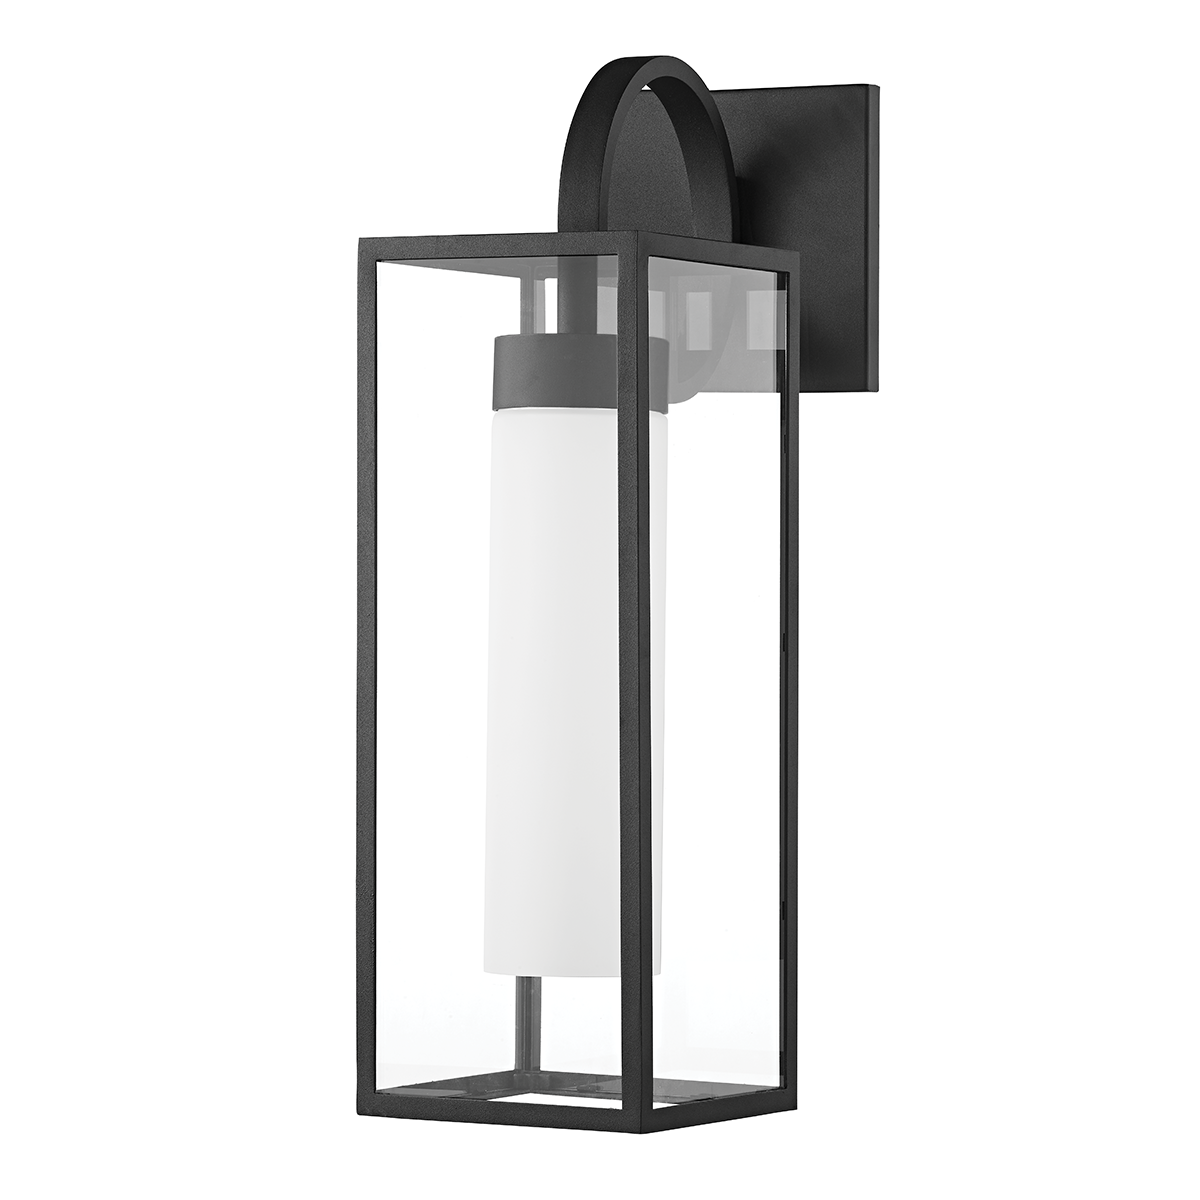 Troy PAX 1 LIGHT LARGE EXTERIOR WALL SCONCE B6913 Outdoor l Wall Troy Lighting   